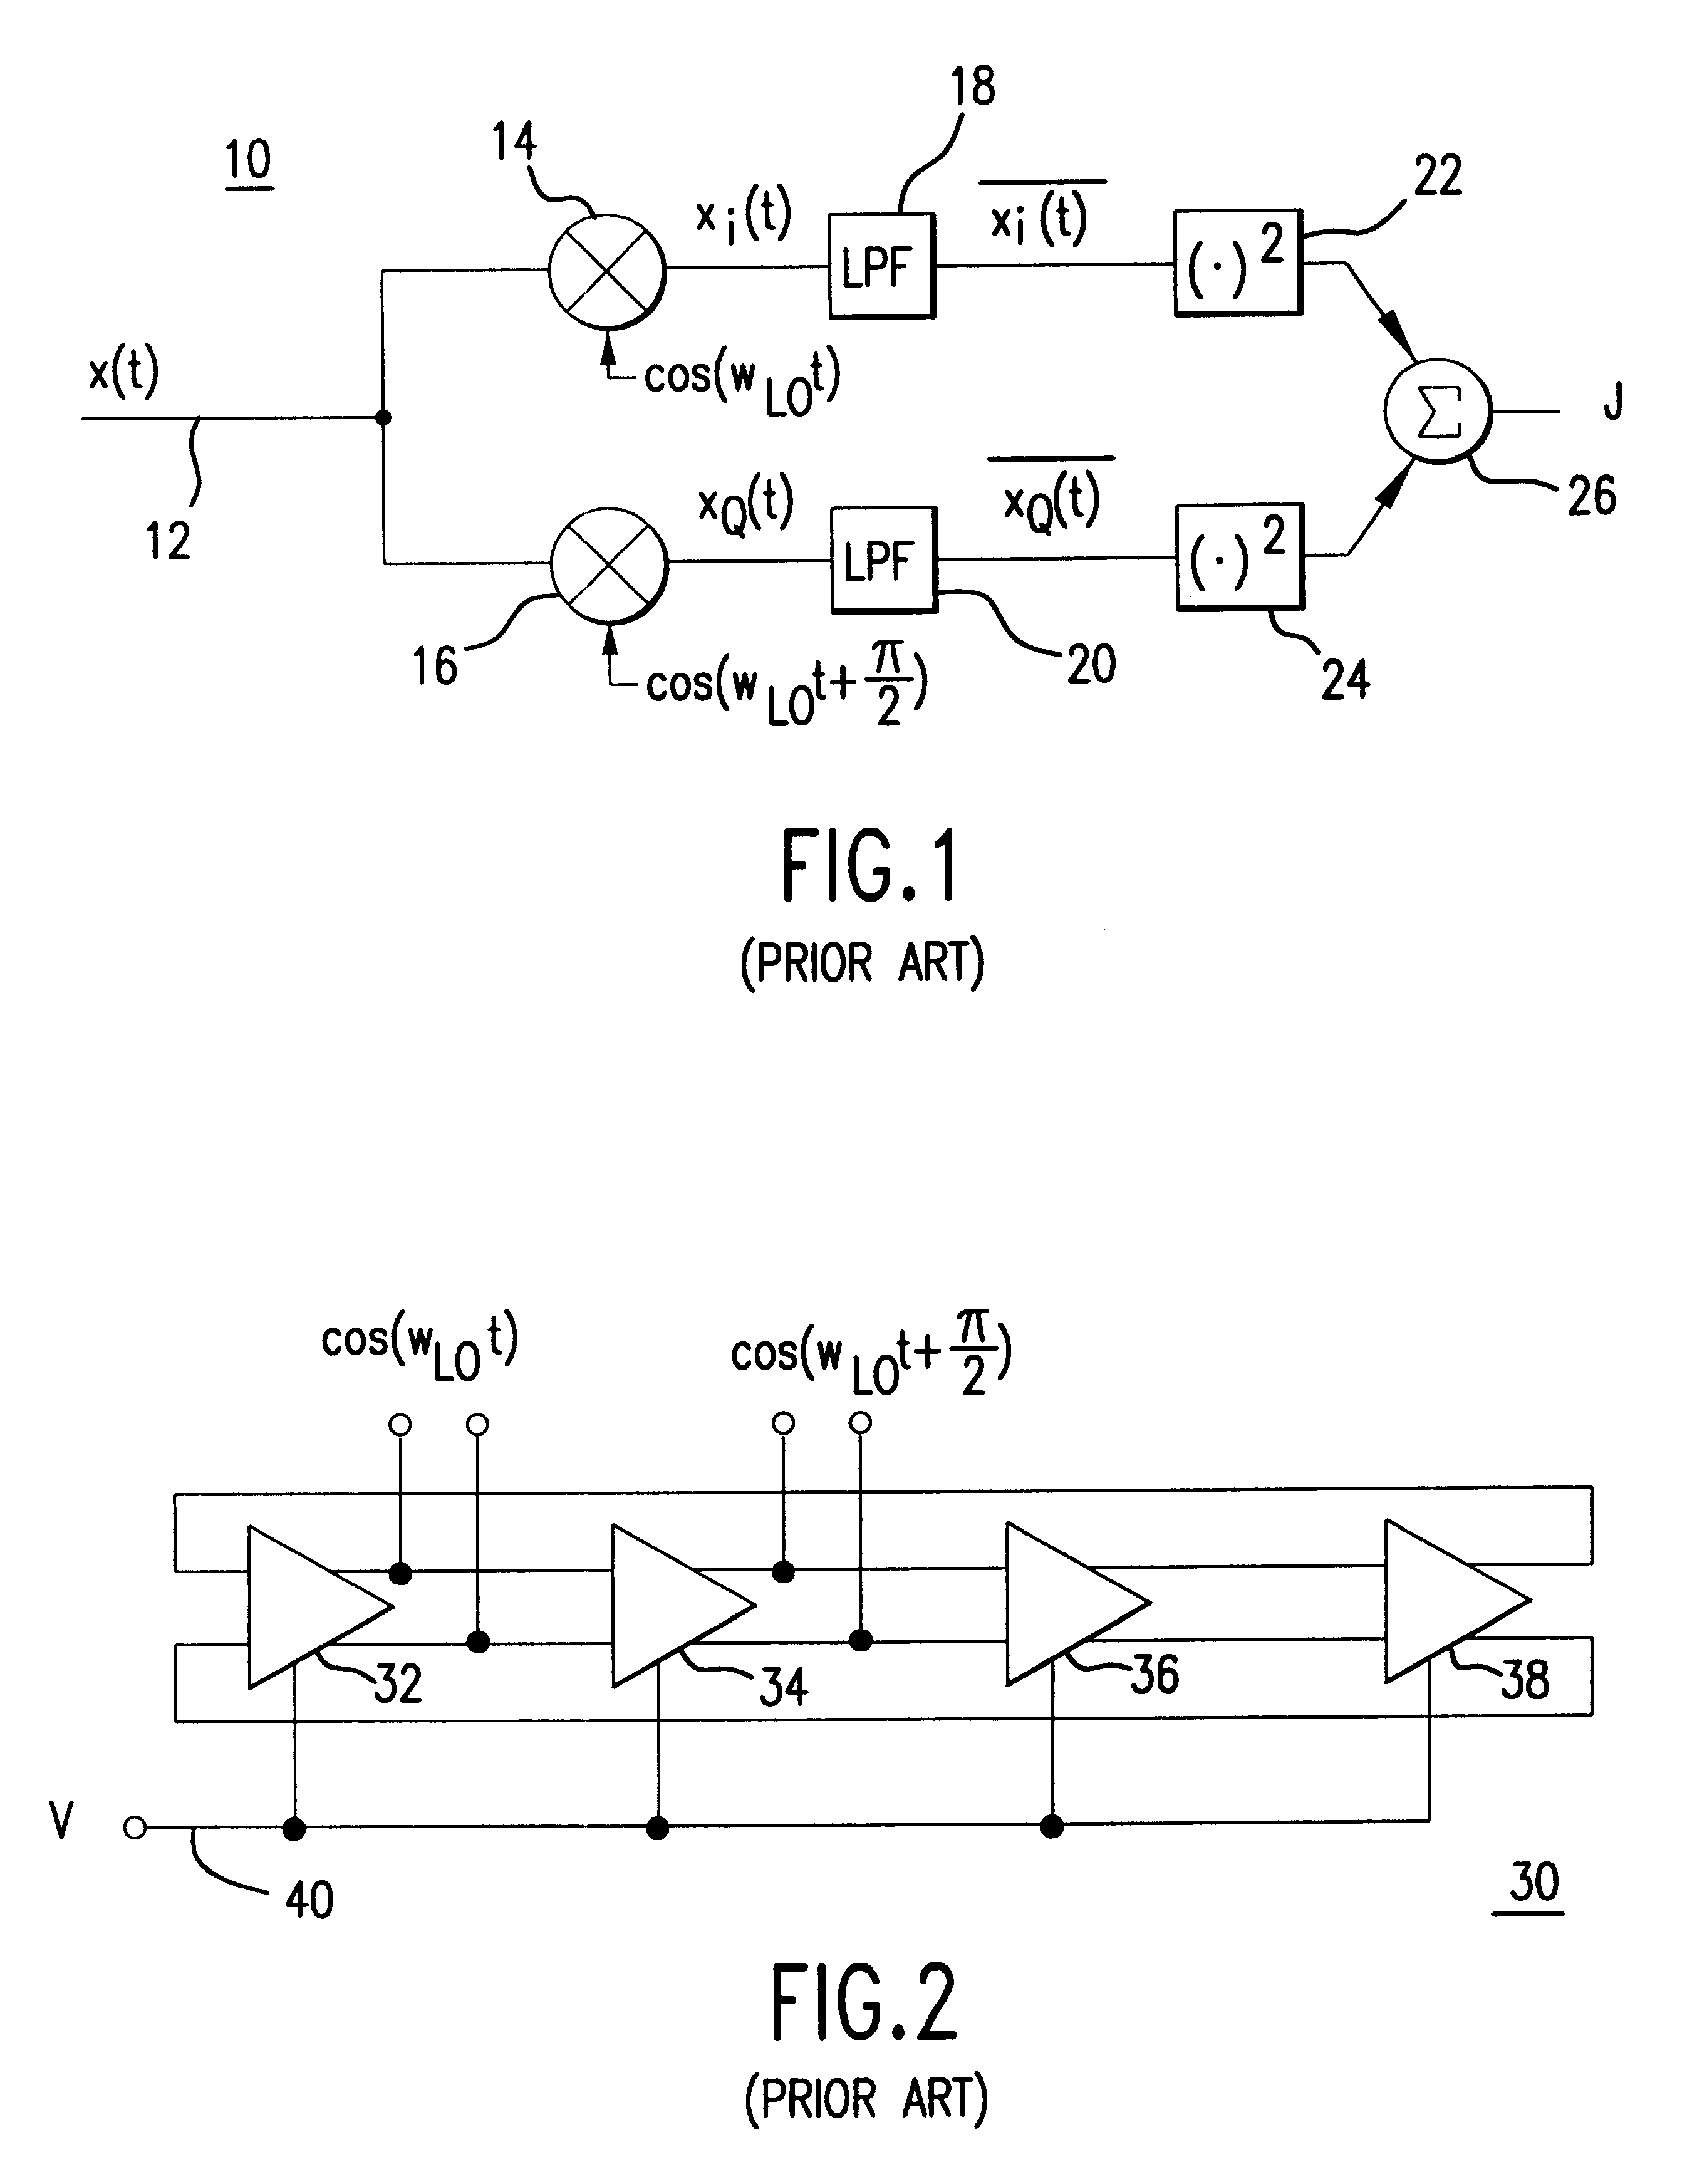 Multiphase receiver and oscillator